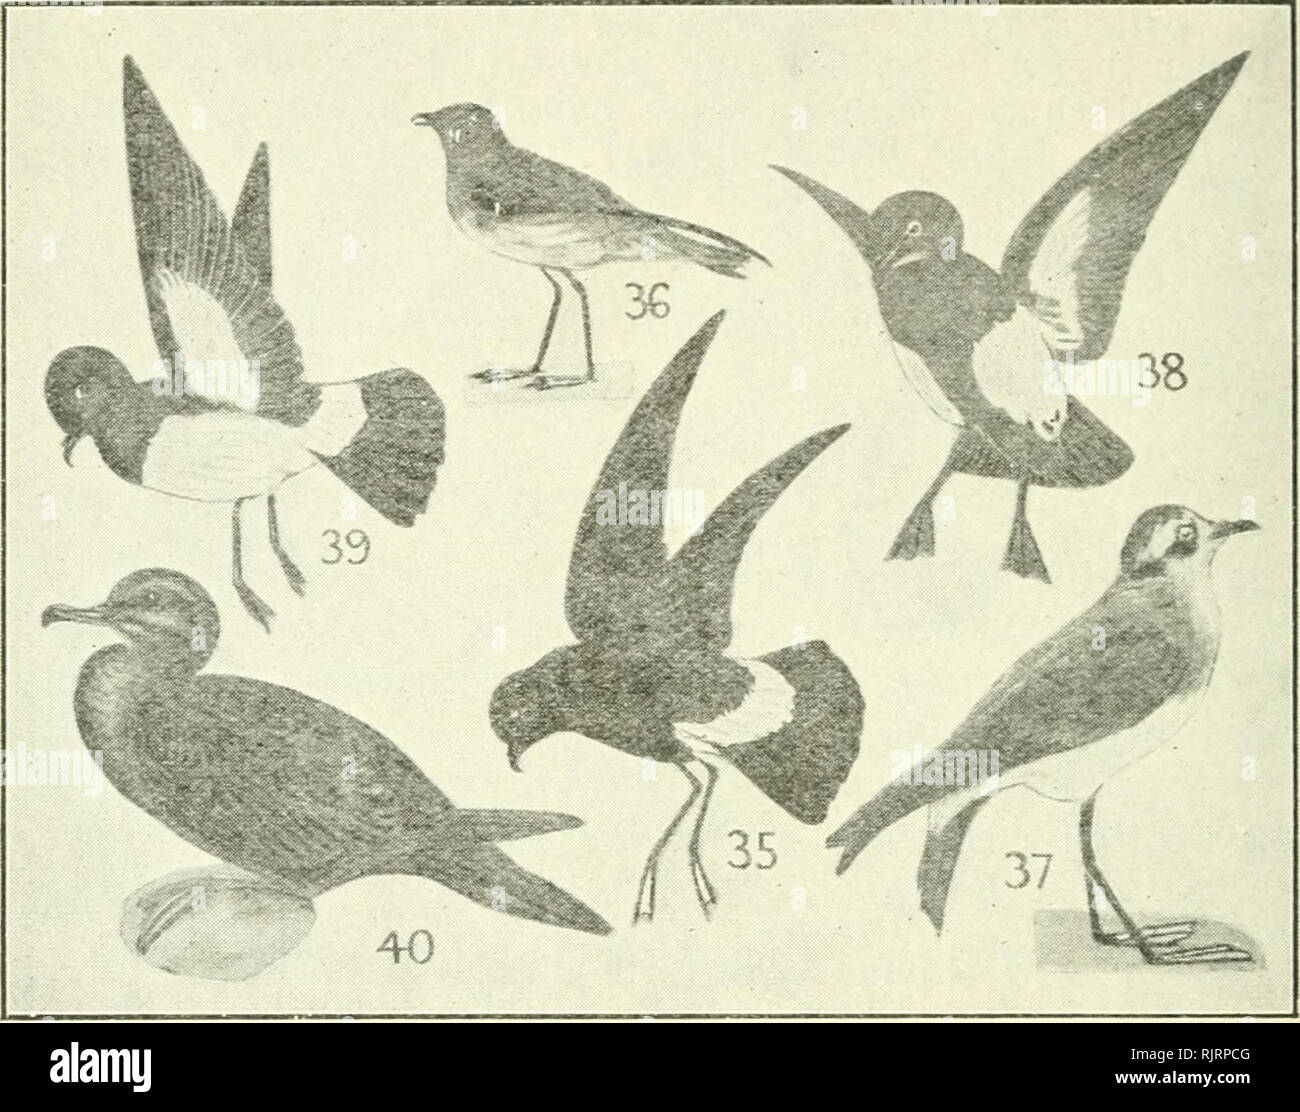 . An Australian bird book : a pocket book for field use. Birds -- Australia Identification. 26 AX AUSTRALIAN lilRD BOOK.. ORDER VIII.—PROCELLARIIFORMES, TUBINARES, TUBE-NOSED SWIMMERS. F. 27. PROCELLARIIDAE (5), STORM - PETRELS, MOTHER CAREY'S CHICKENS, 25 sp — 10(3)A., 2(0)0., 10(0)P., 7(0)E., 13(4)Nc, 13(3)N1. 2 35 Wilson Storm-Petrel (Yellow - webbed, Flat - clawed), 3 Oceanites oceanica, S. Polar regions N. to British Is. (ace), Labrador (ace), India, A., N.Z. c. ocean 6.8 Blackish; base tail above below white; legs black; webs yellow; f., sim. Shellfish, small fish, greasy. During the int Stock Photo